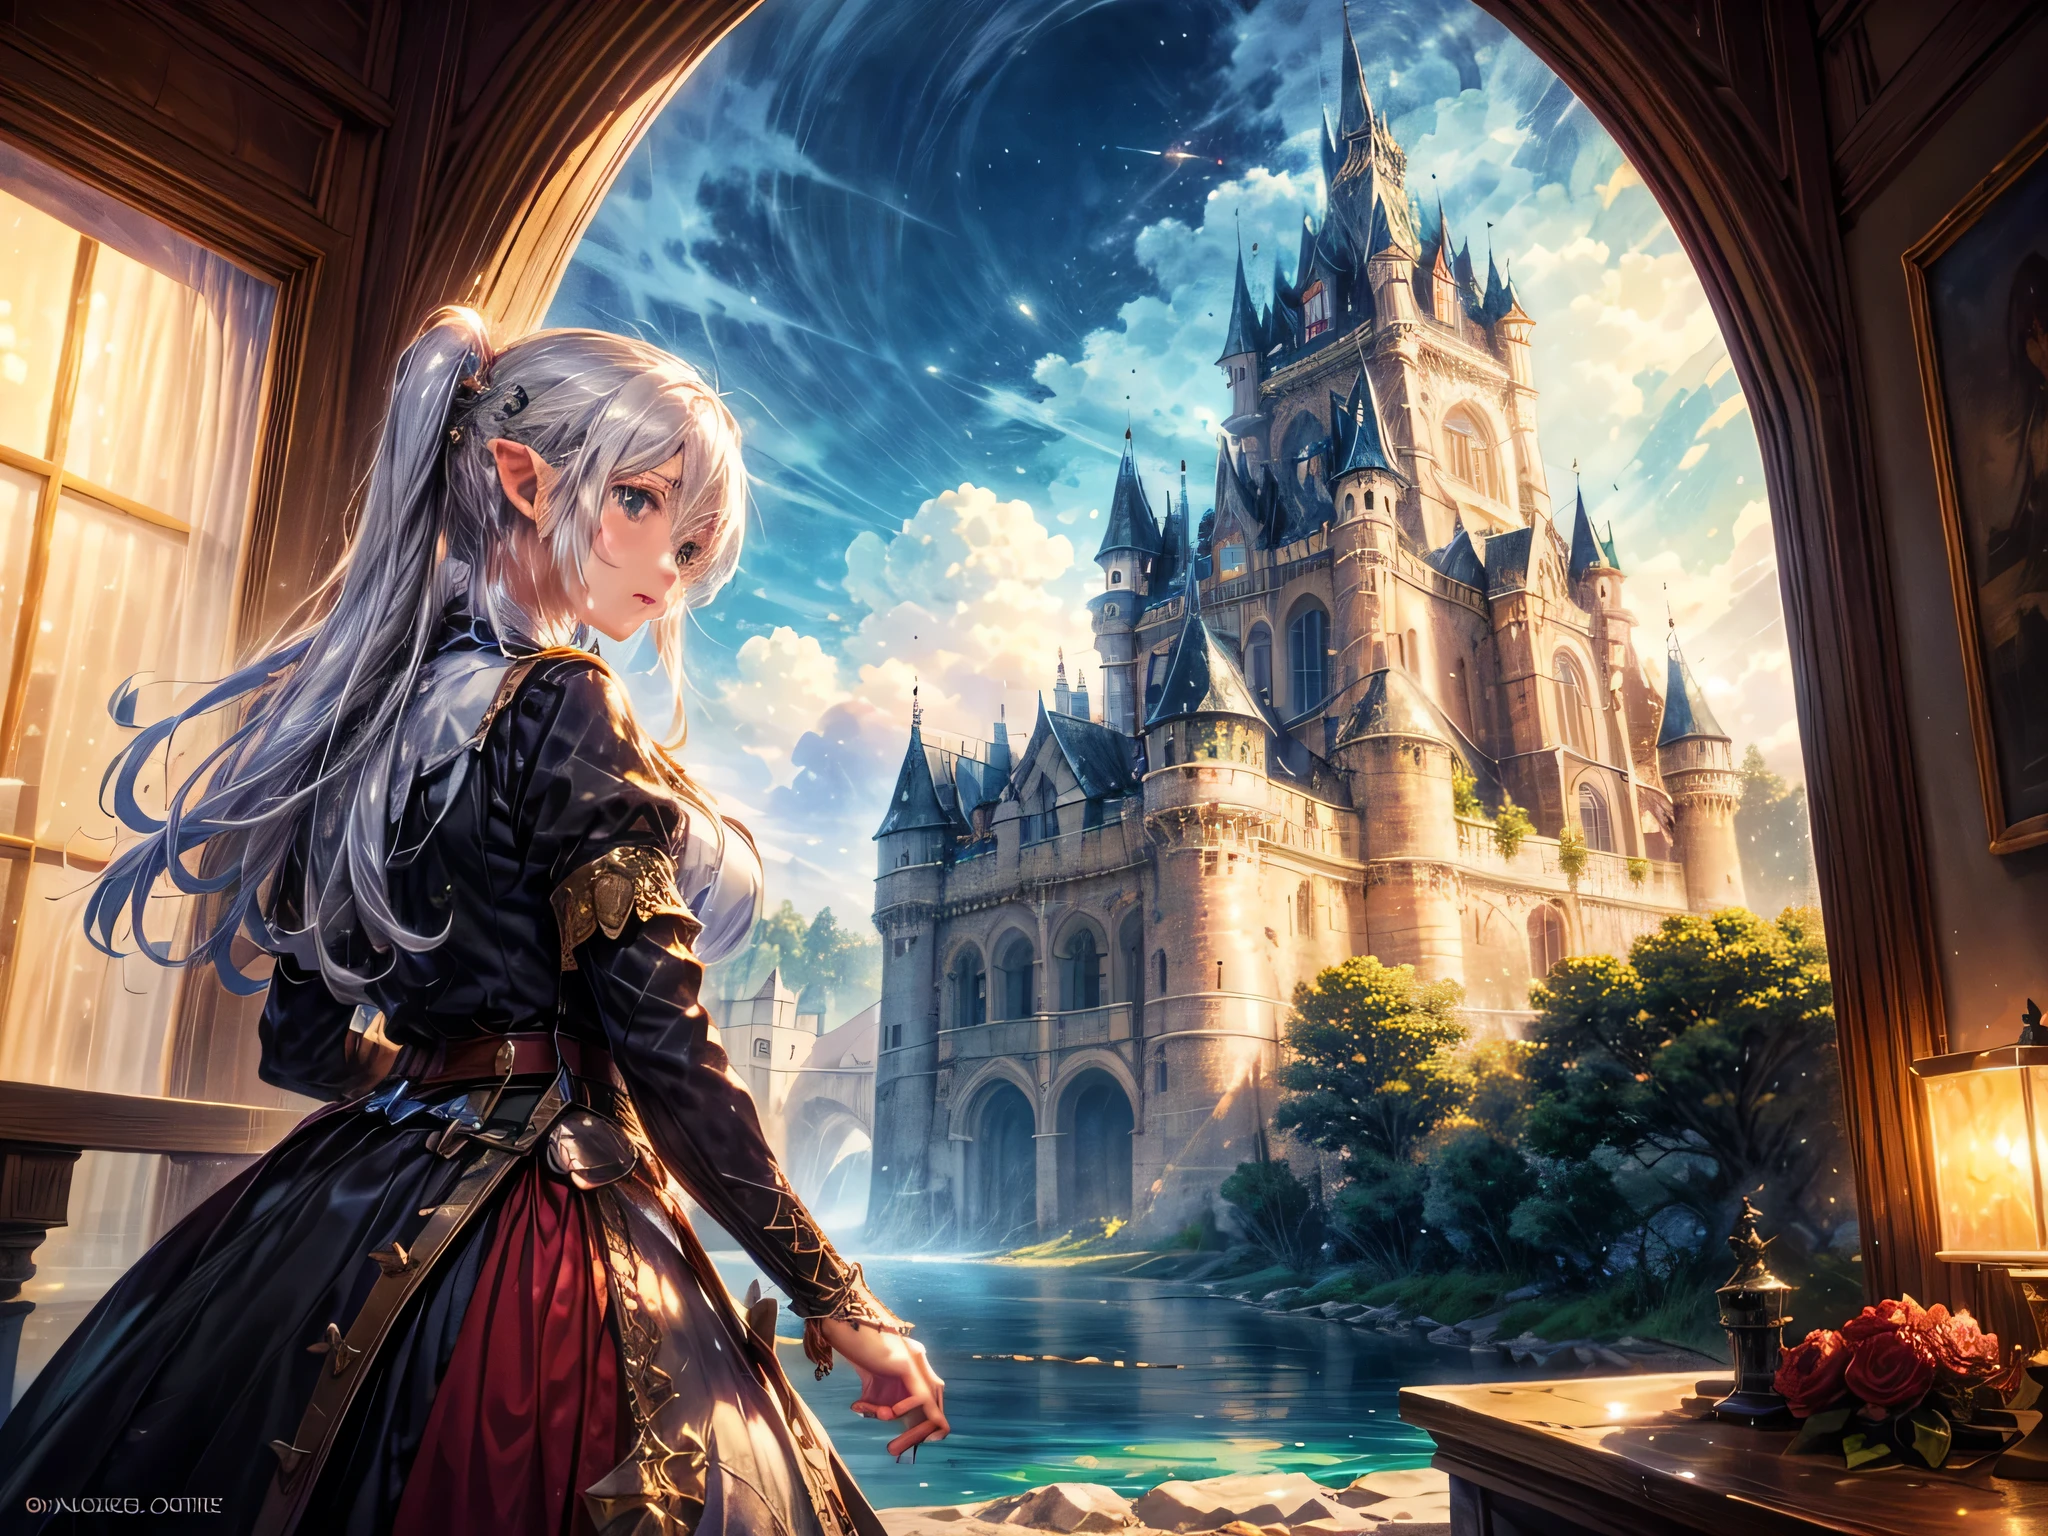 fantasy art, RPG art, a princess looking through her window at a magical castle, a beautiful elven princess looking through her window to see a magical castle, an impressive best detailed castle, with towers, bridges, a moat, standing on top of a mountain, moon, 